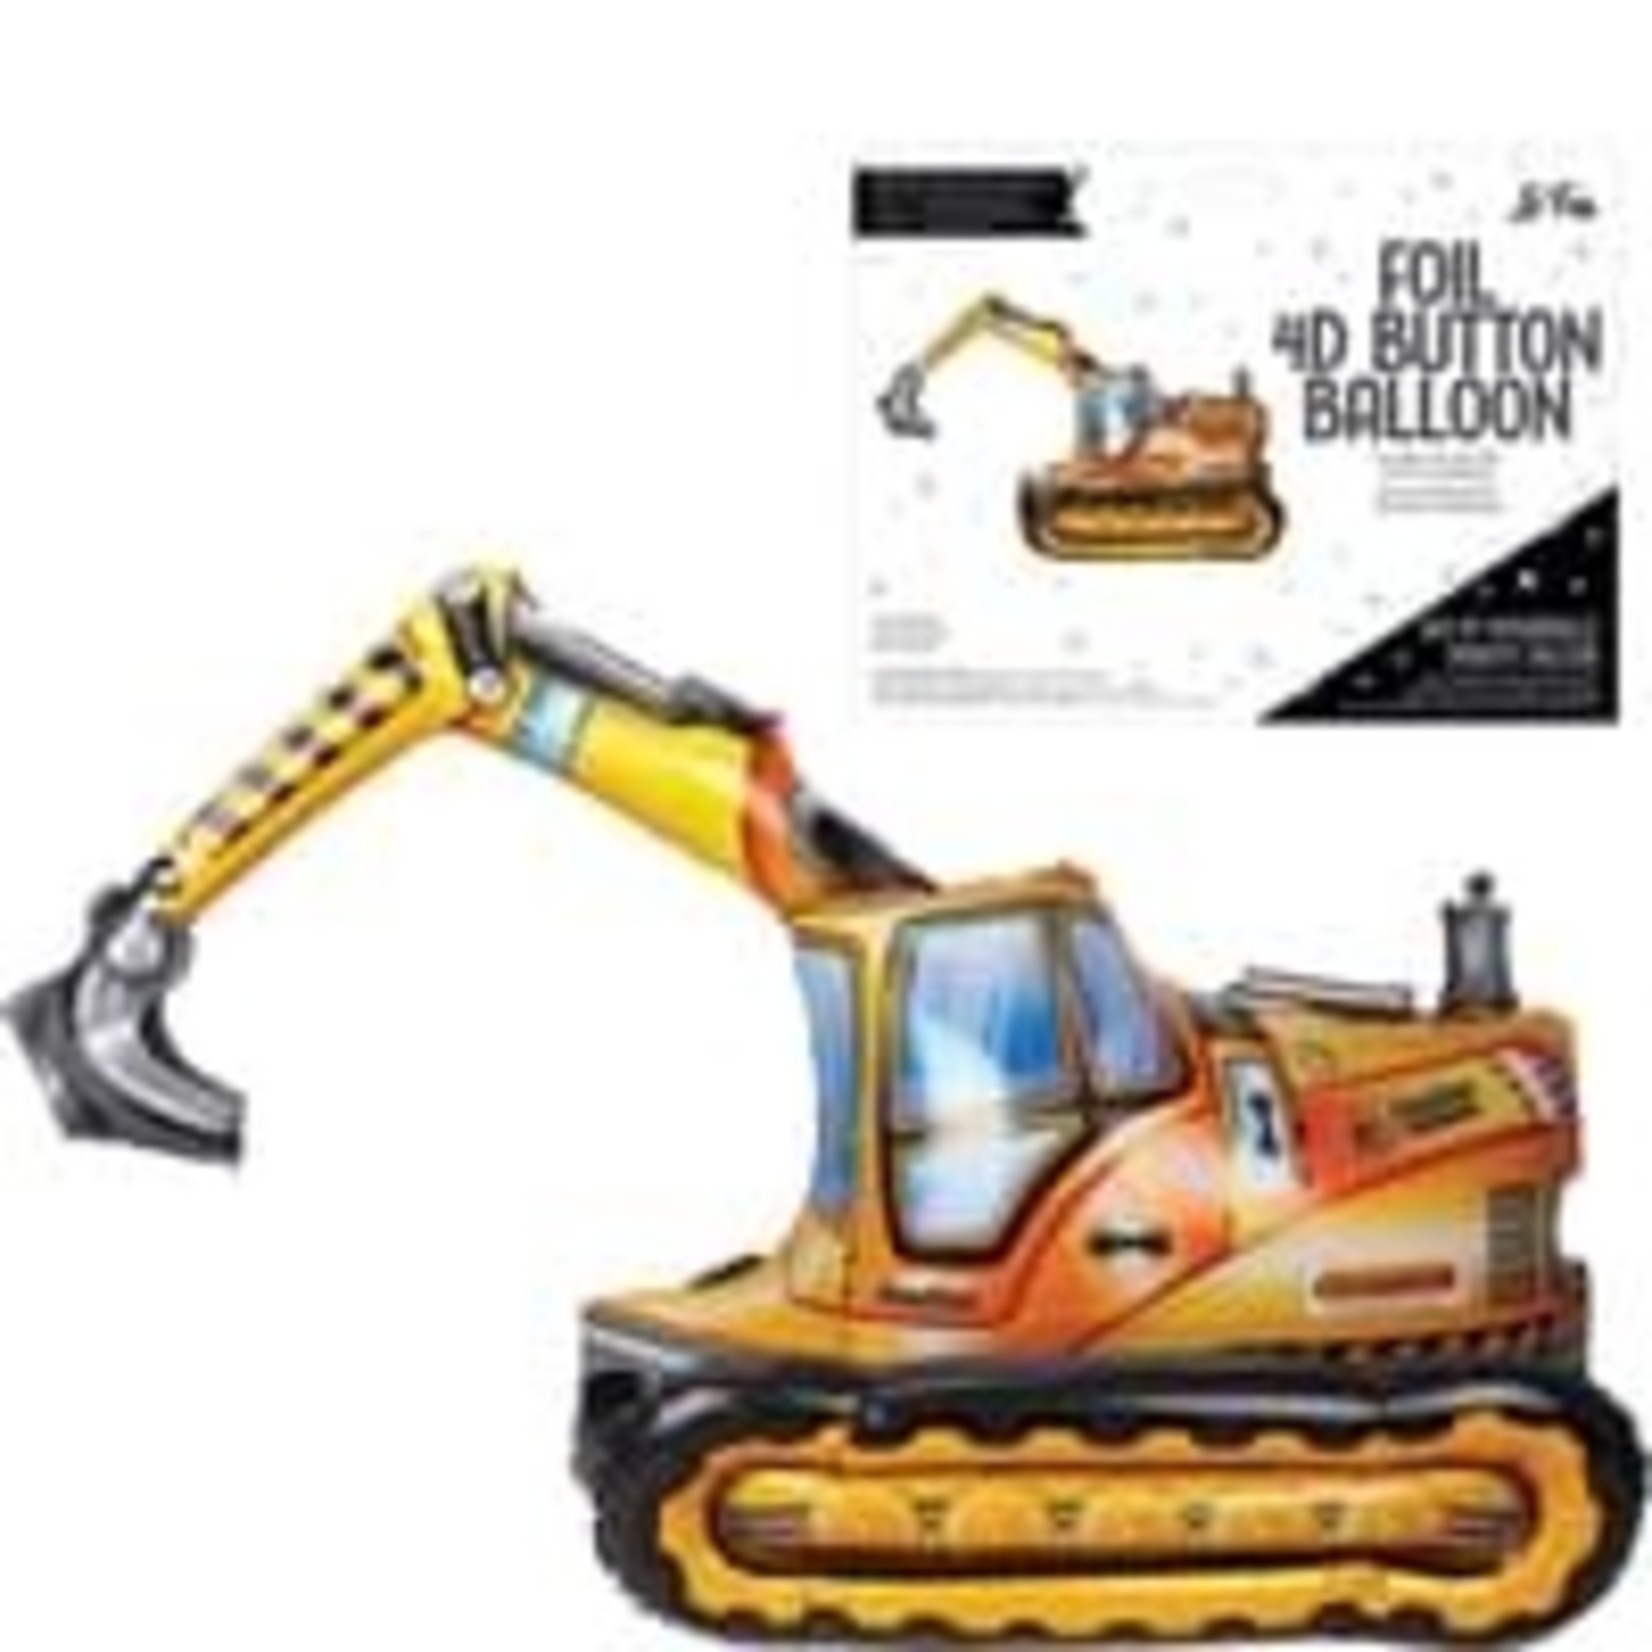 La Fete 38" Excavator/Digger 4D Balloon - 1ct. (Air-Filled Only)